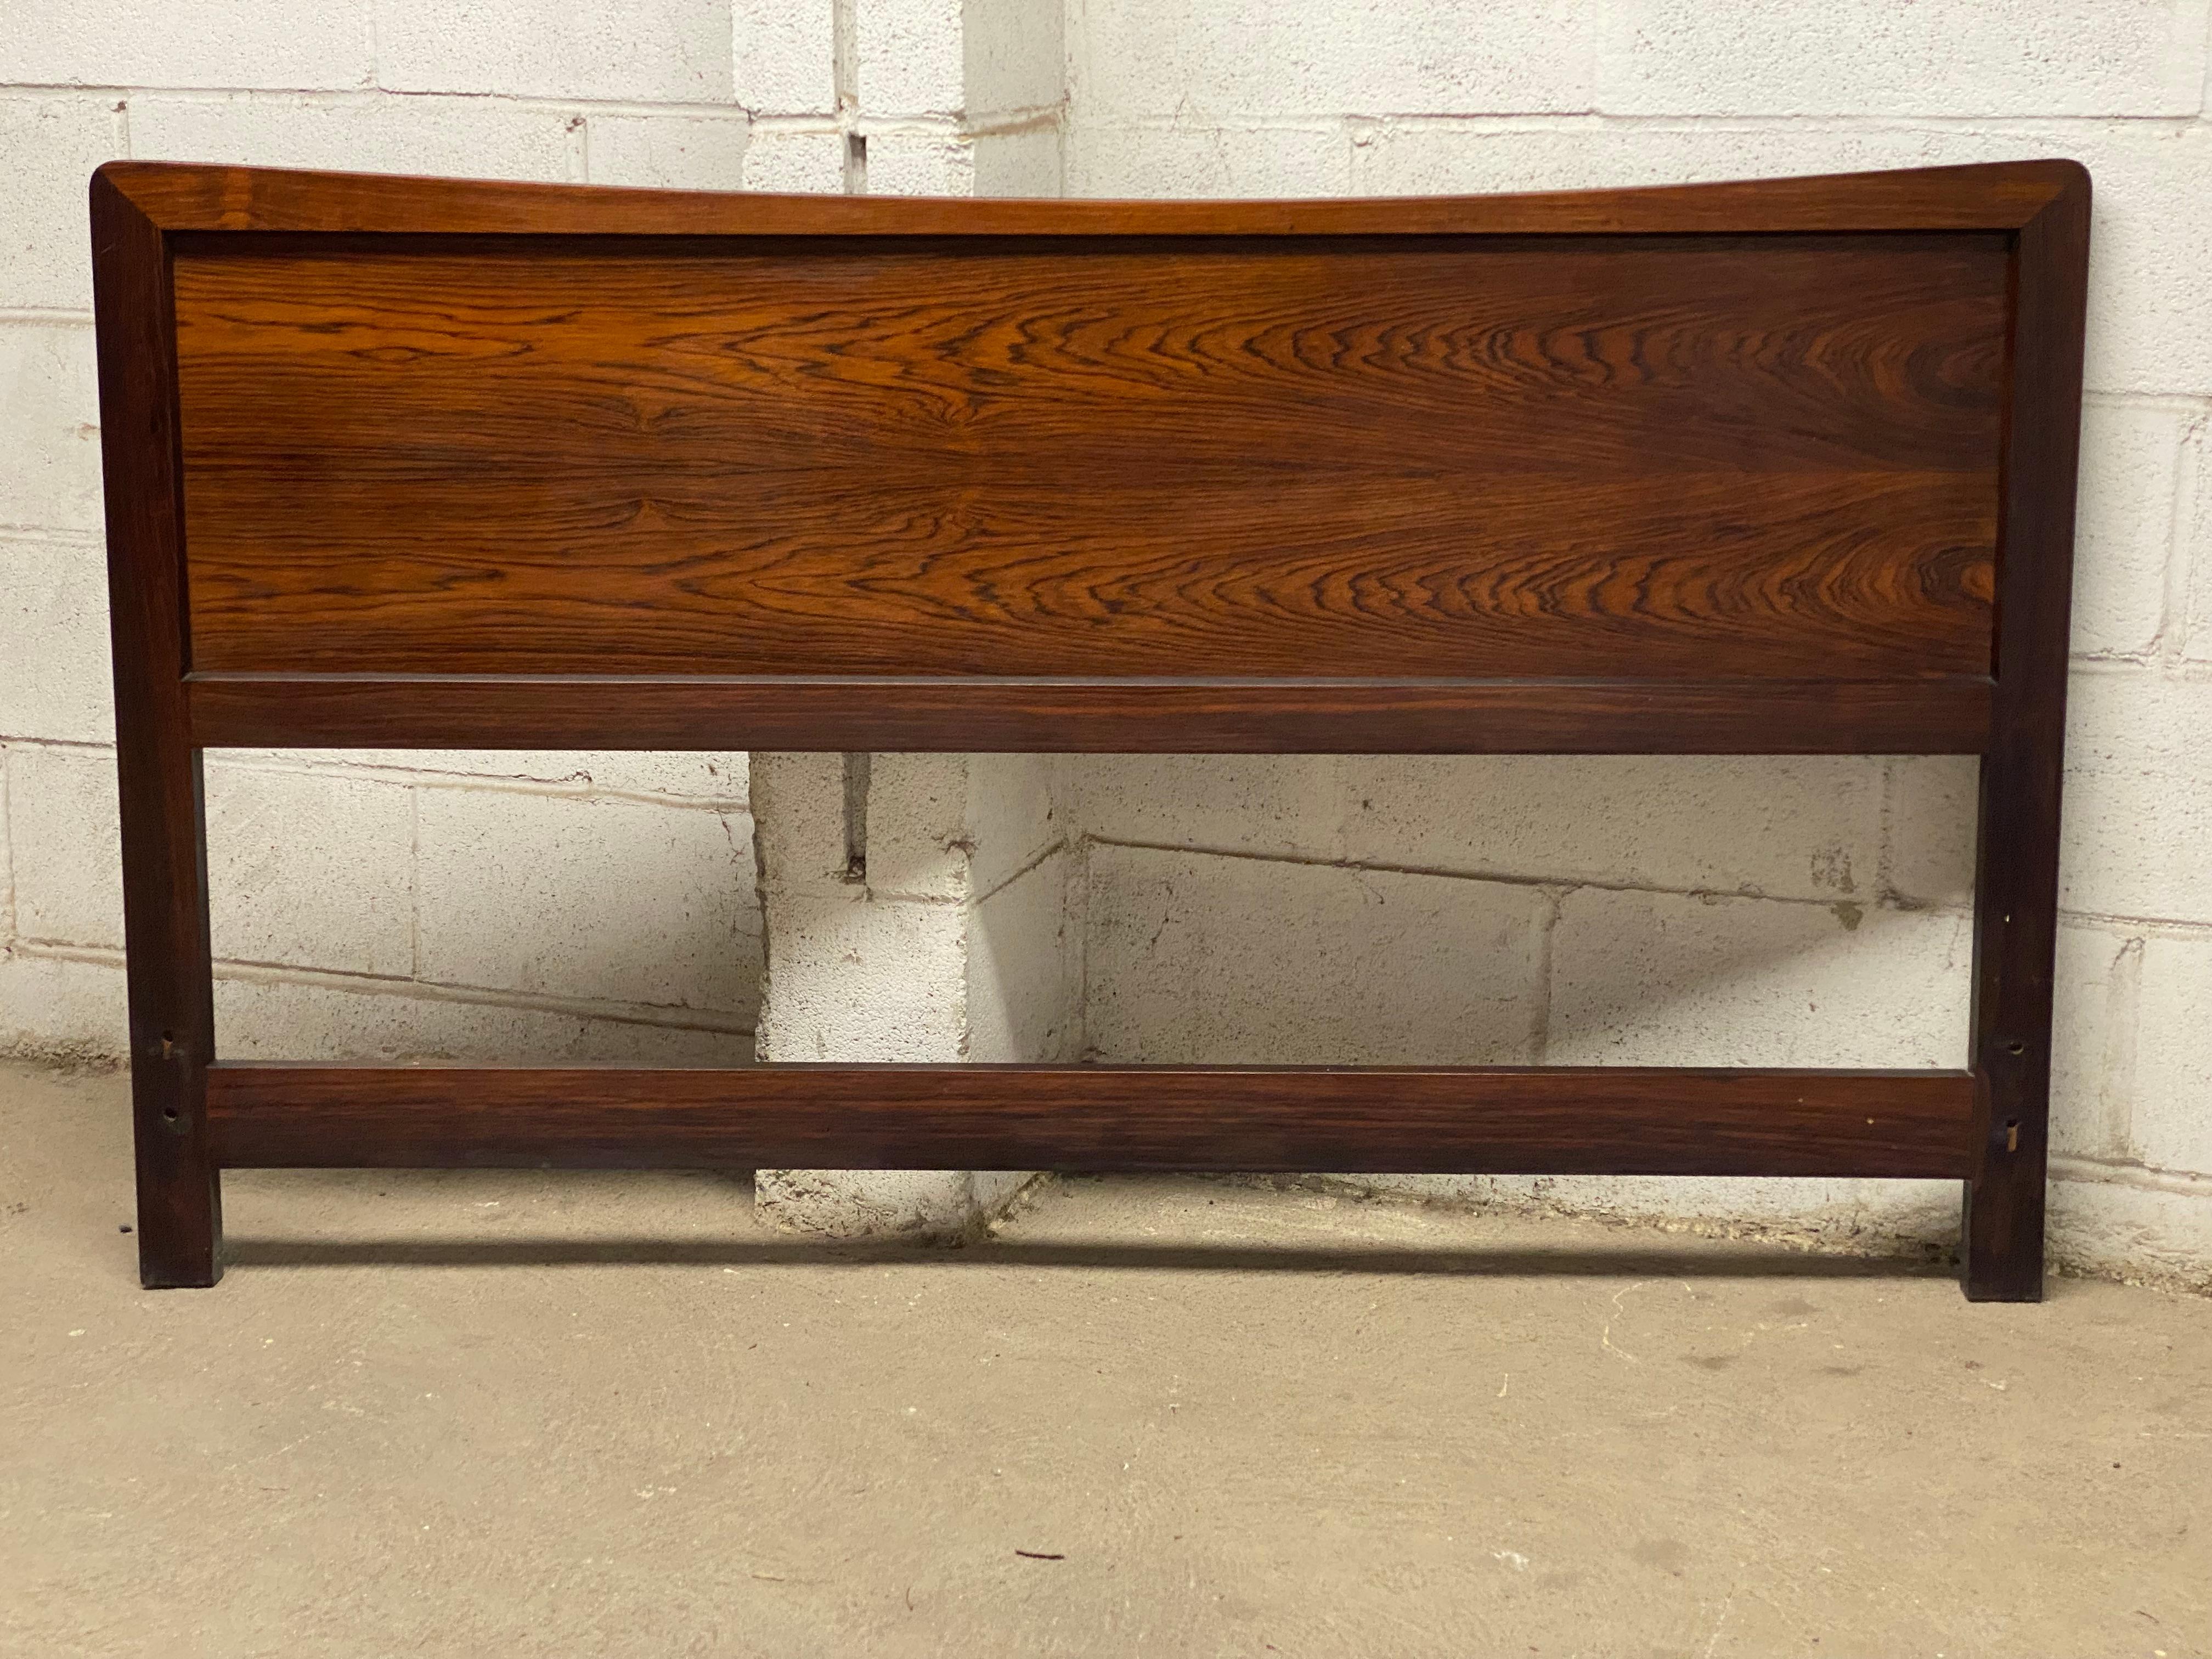 Danish modern rosewood and cane reversible full size headboard. Beautifully figured and complex veneers. Circa 1965. Good overall condition with wear commensurate with age and use. The cane mat is in good condition with some minor fraying around the